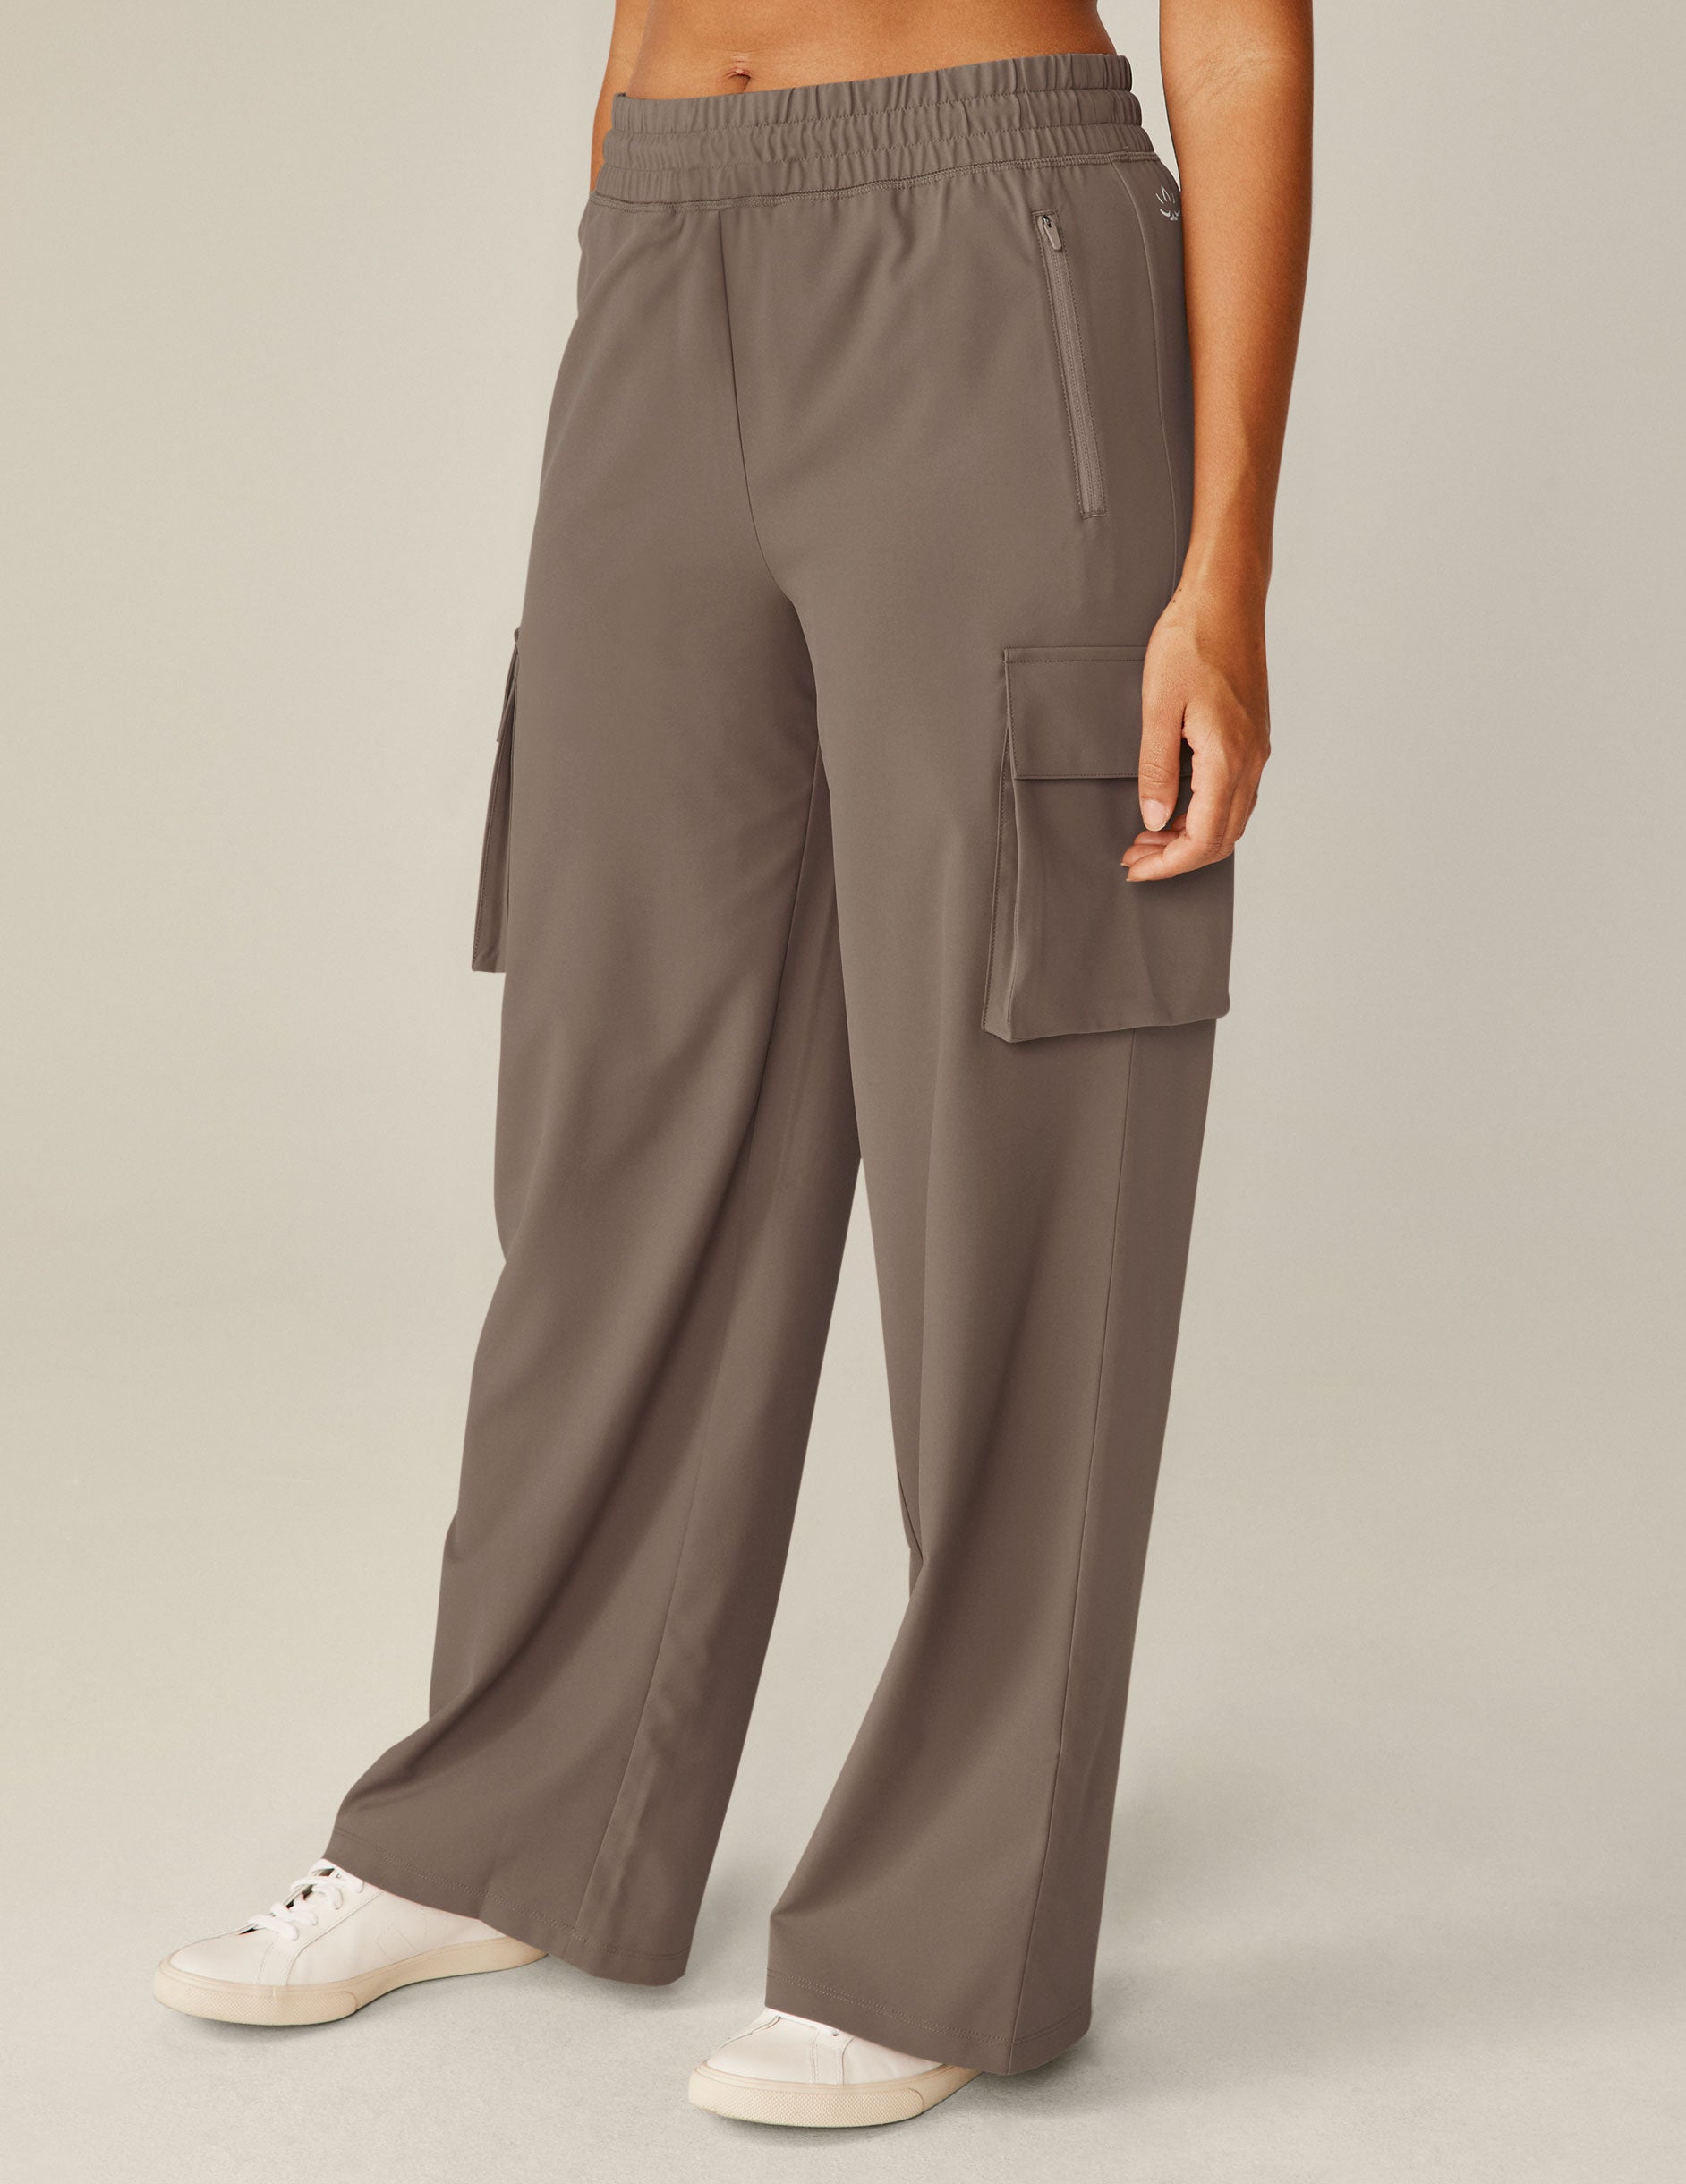 brown cargo style high-waisted pants with pockets. 